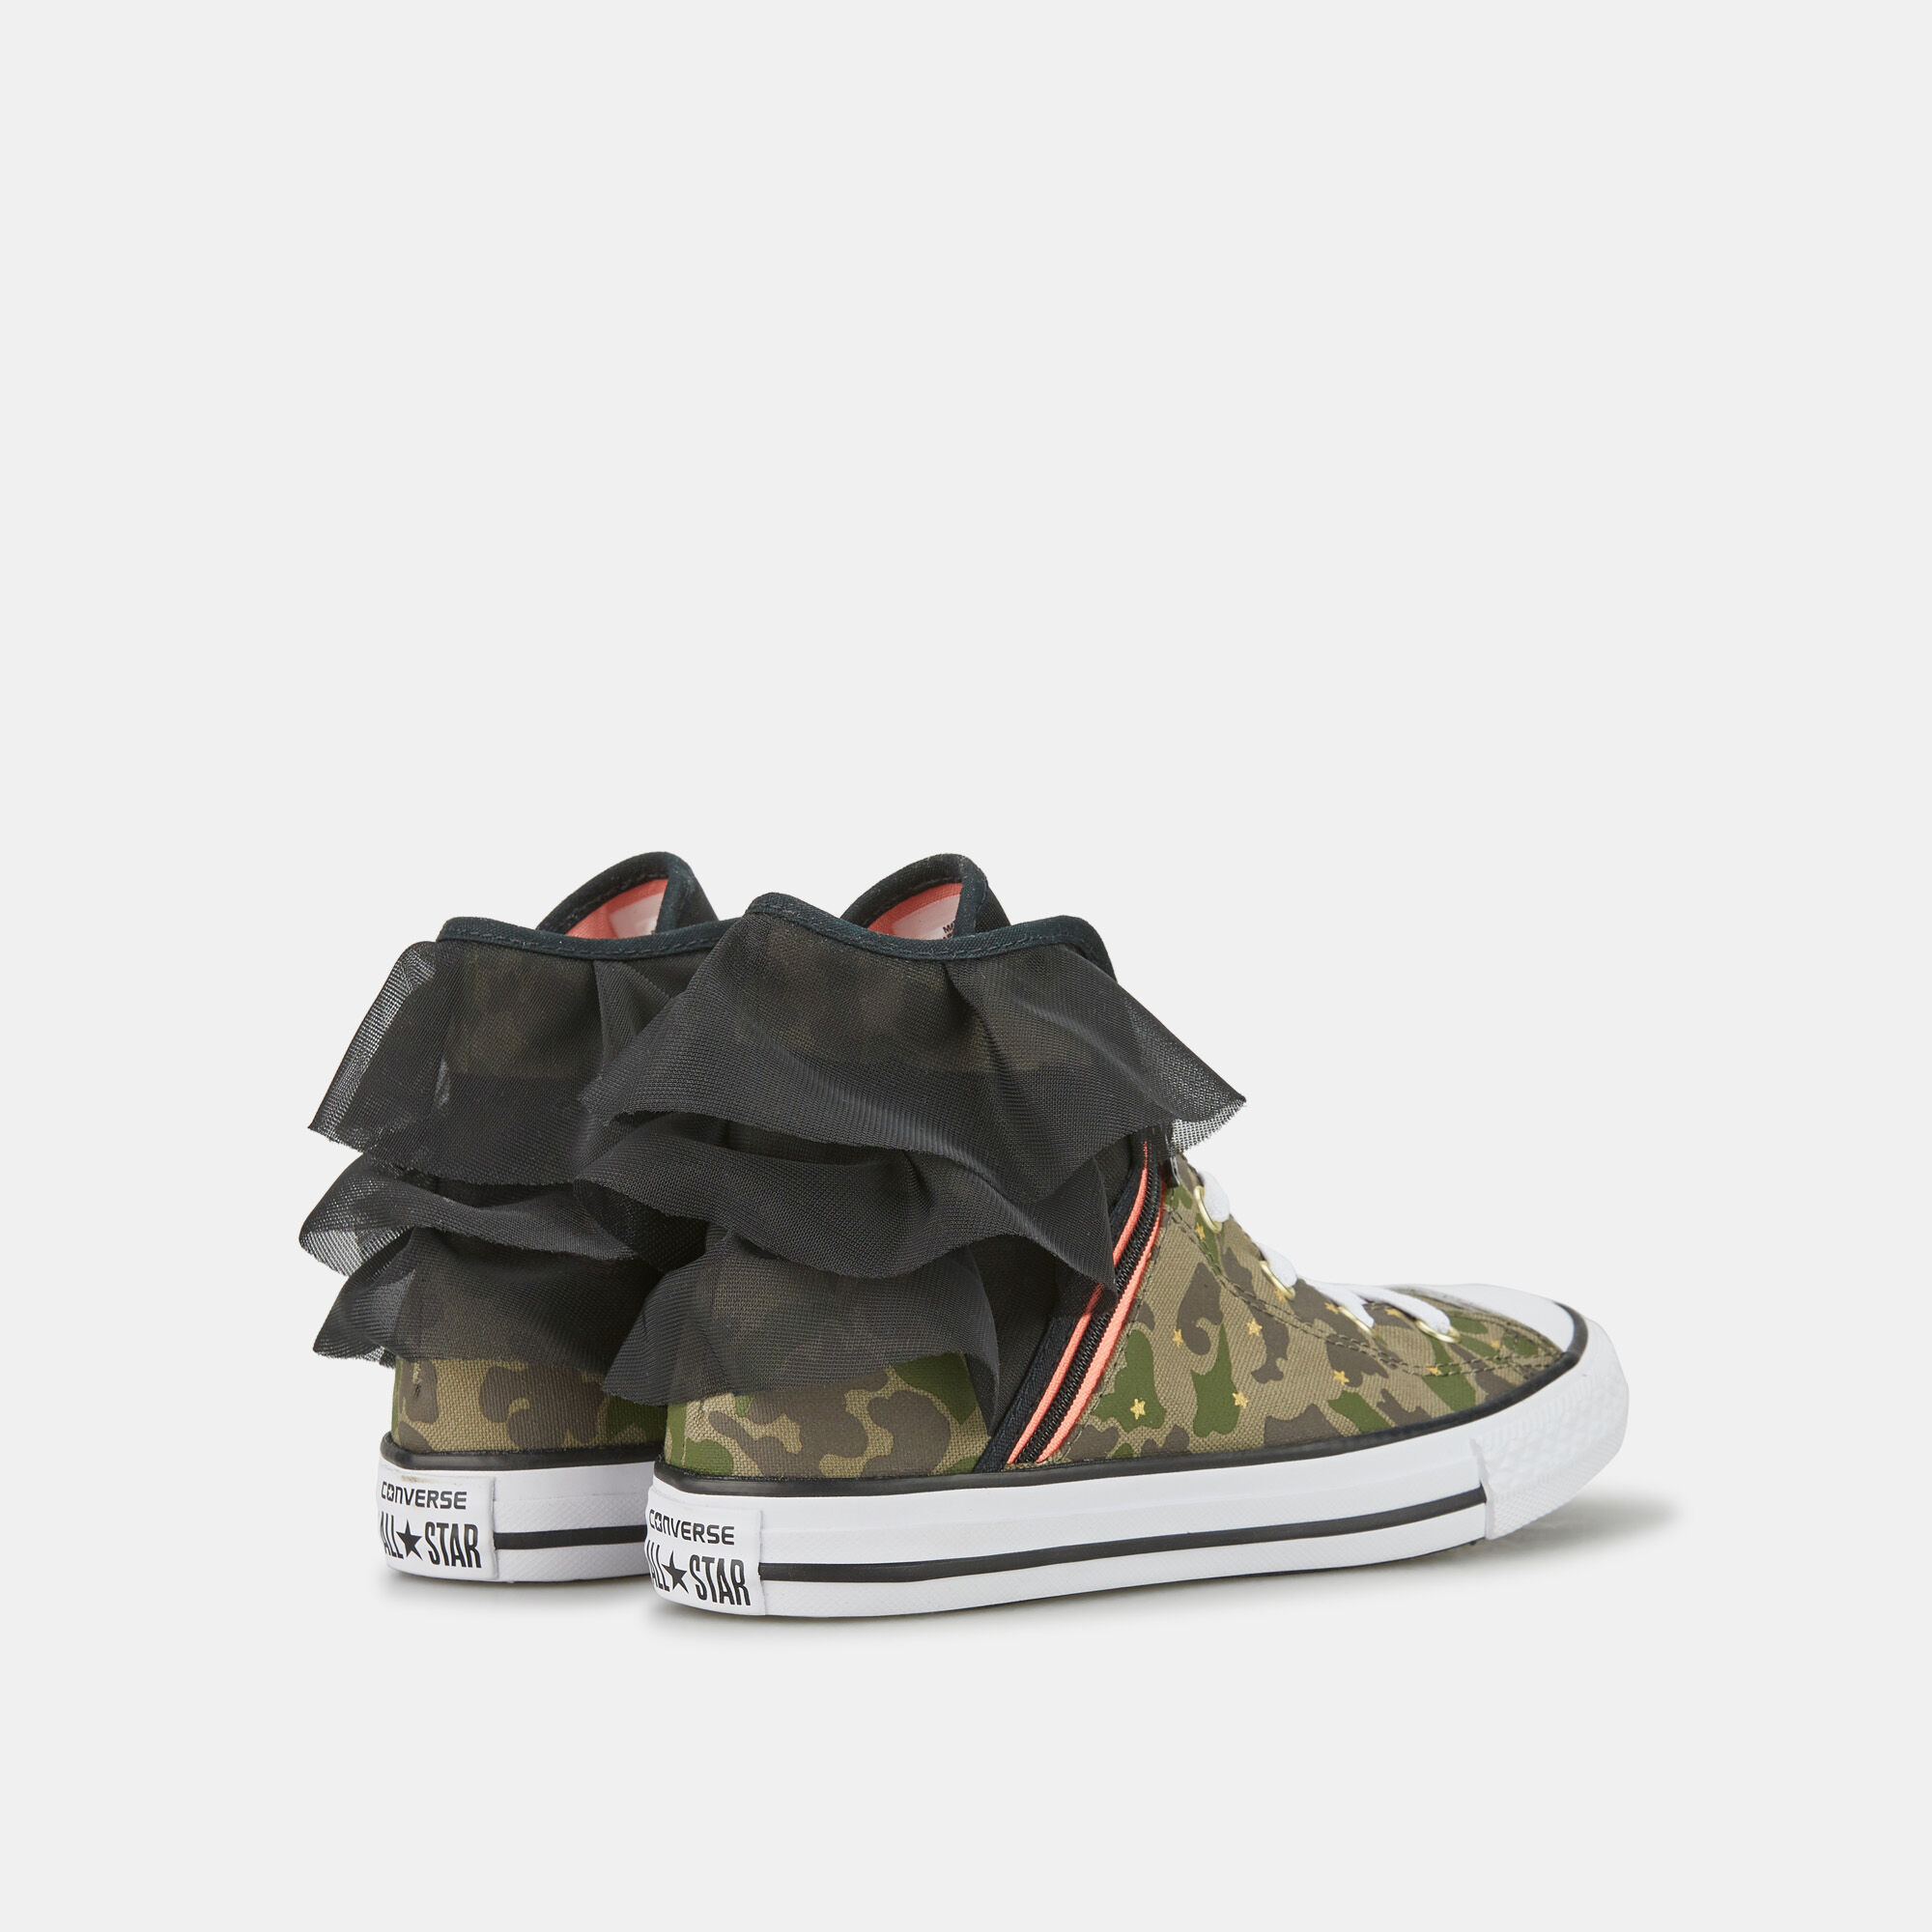 converse chuck taylor all star block party graphic high top